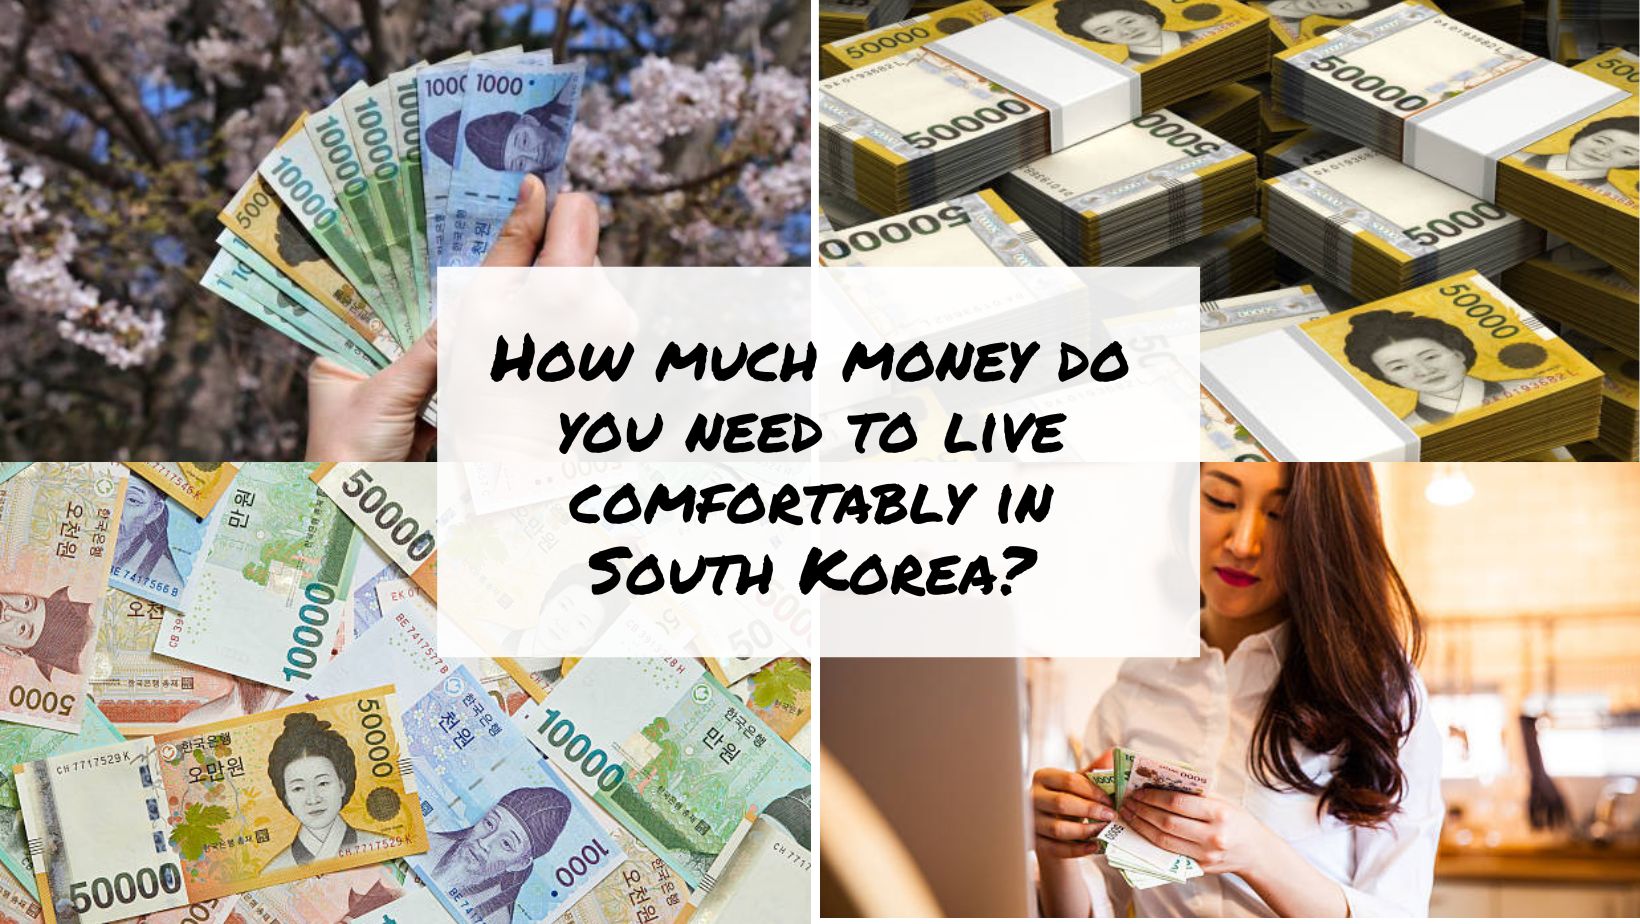 How much money do you need to live comfortably in South Korea